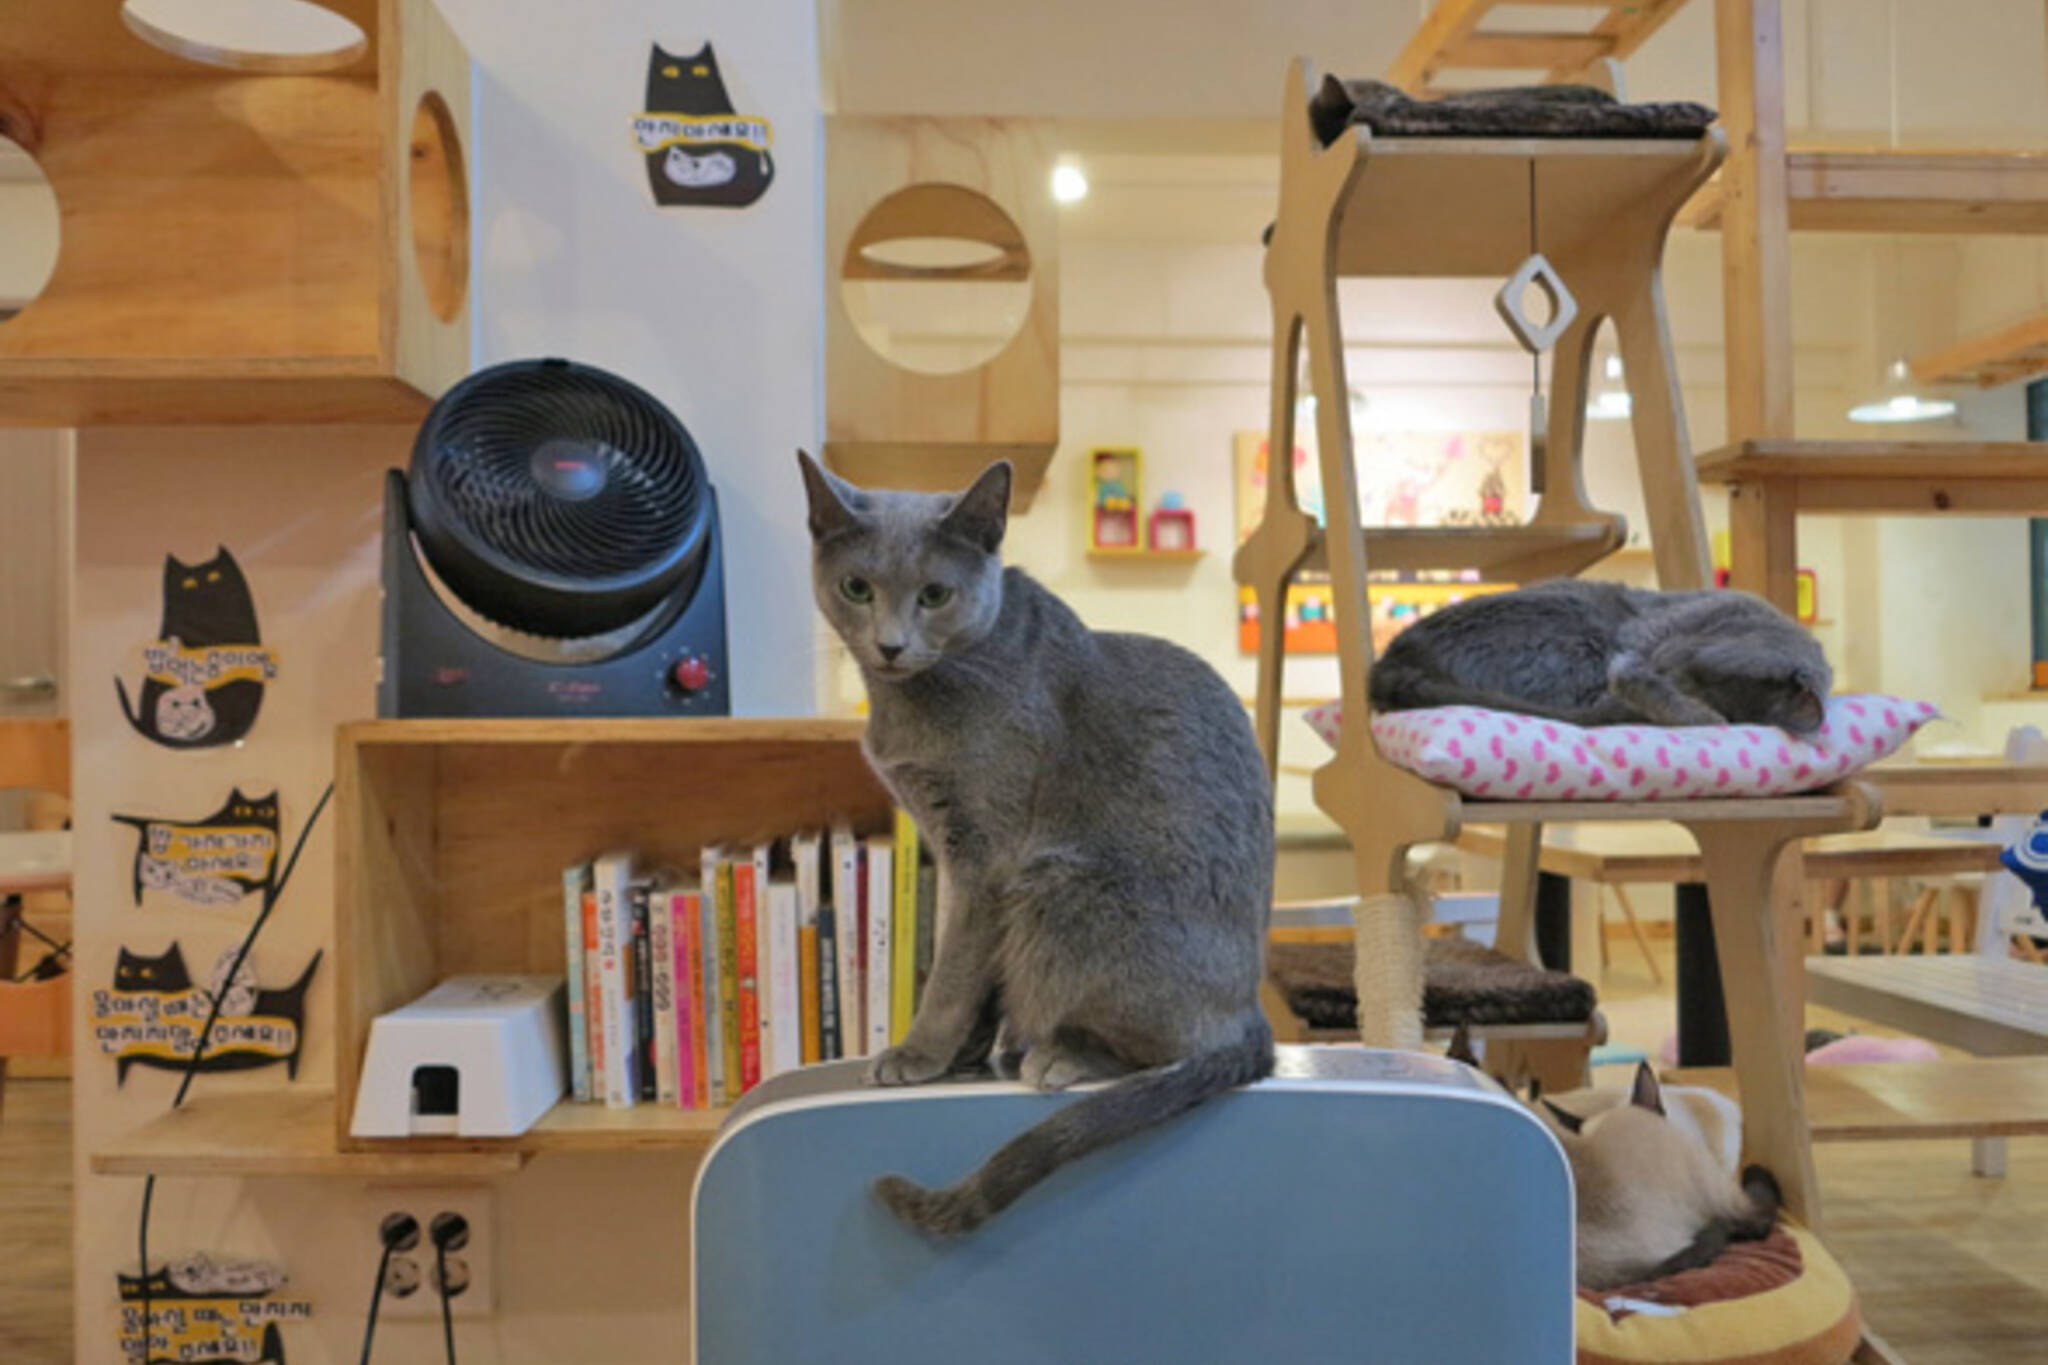 Toronto to get its first cat cafe